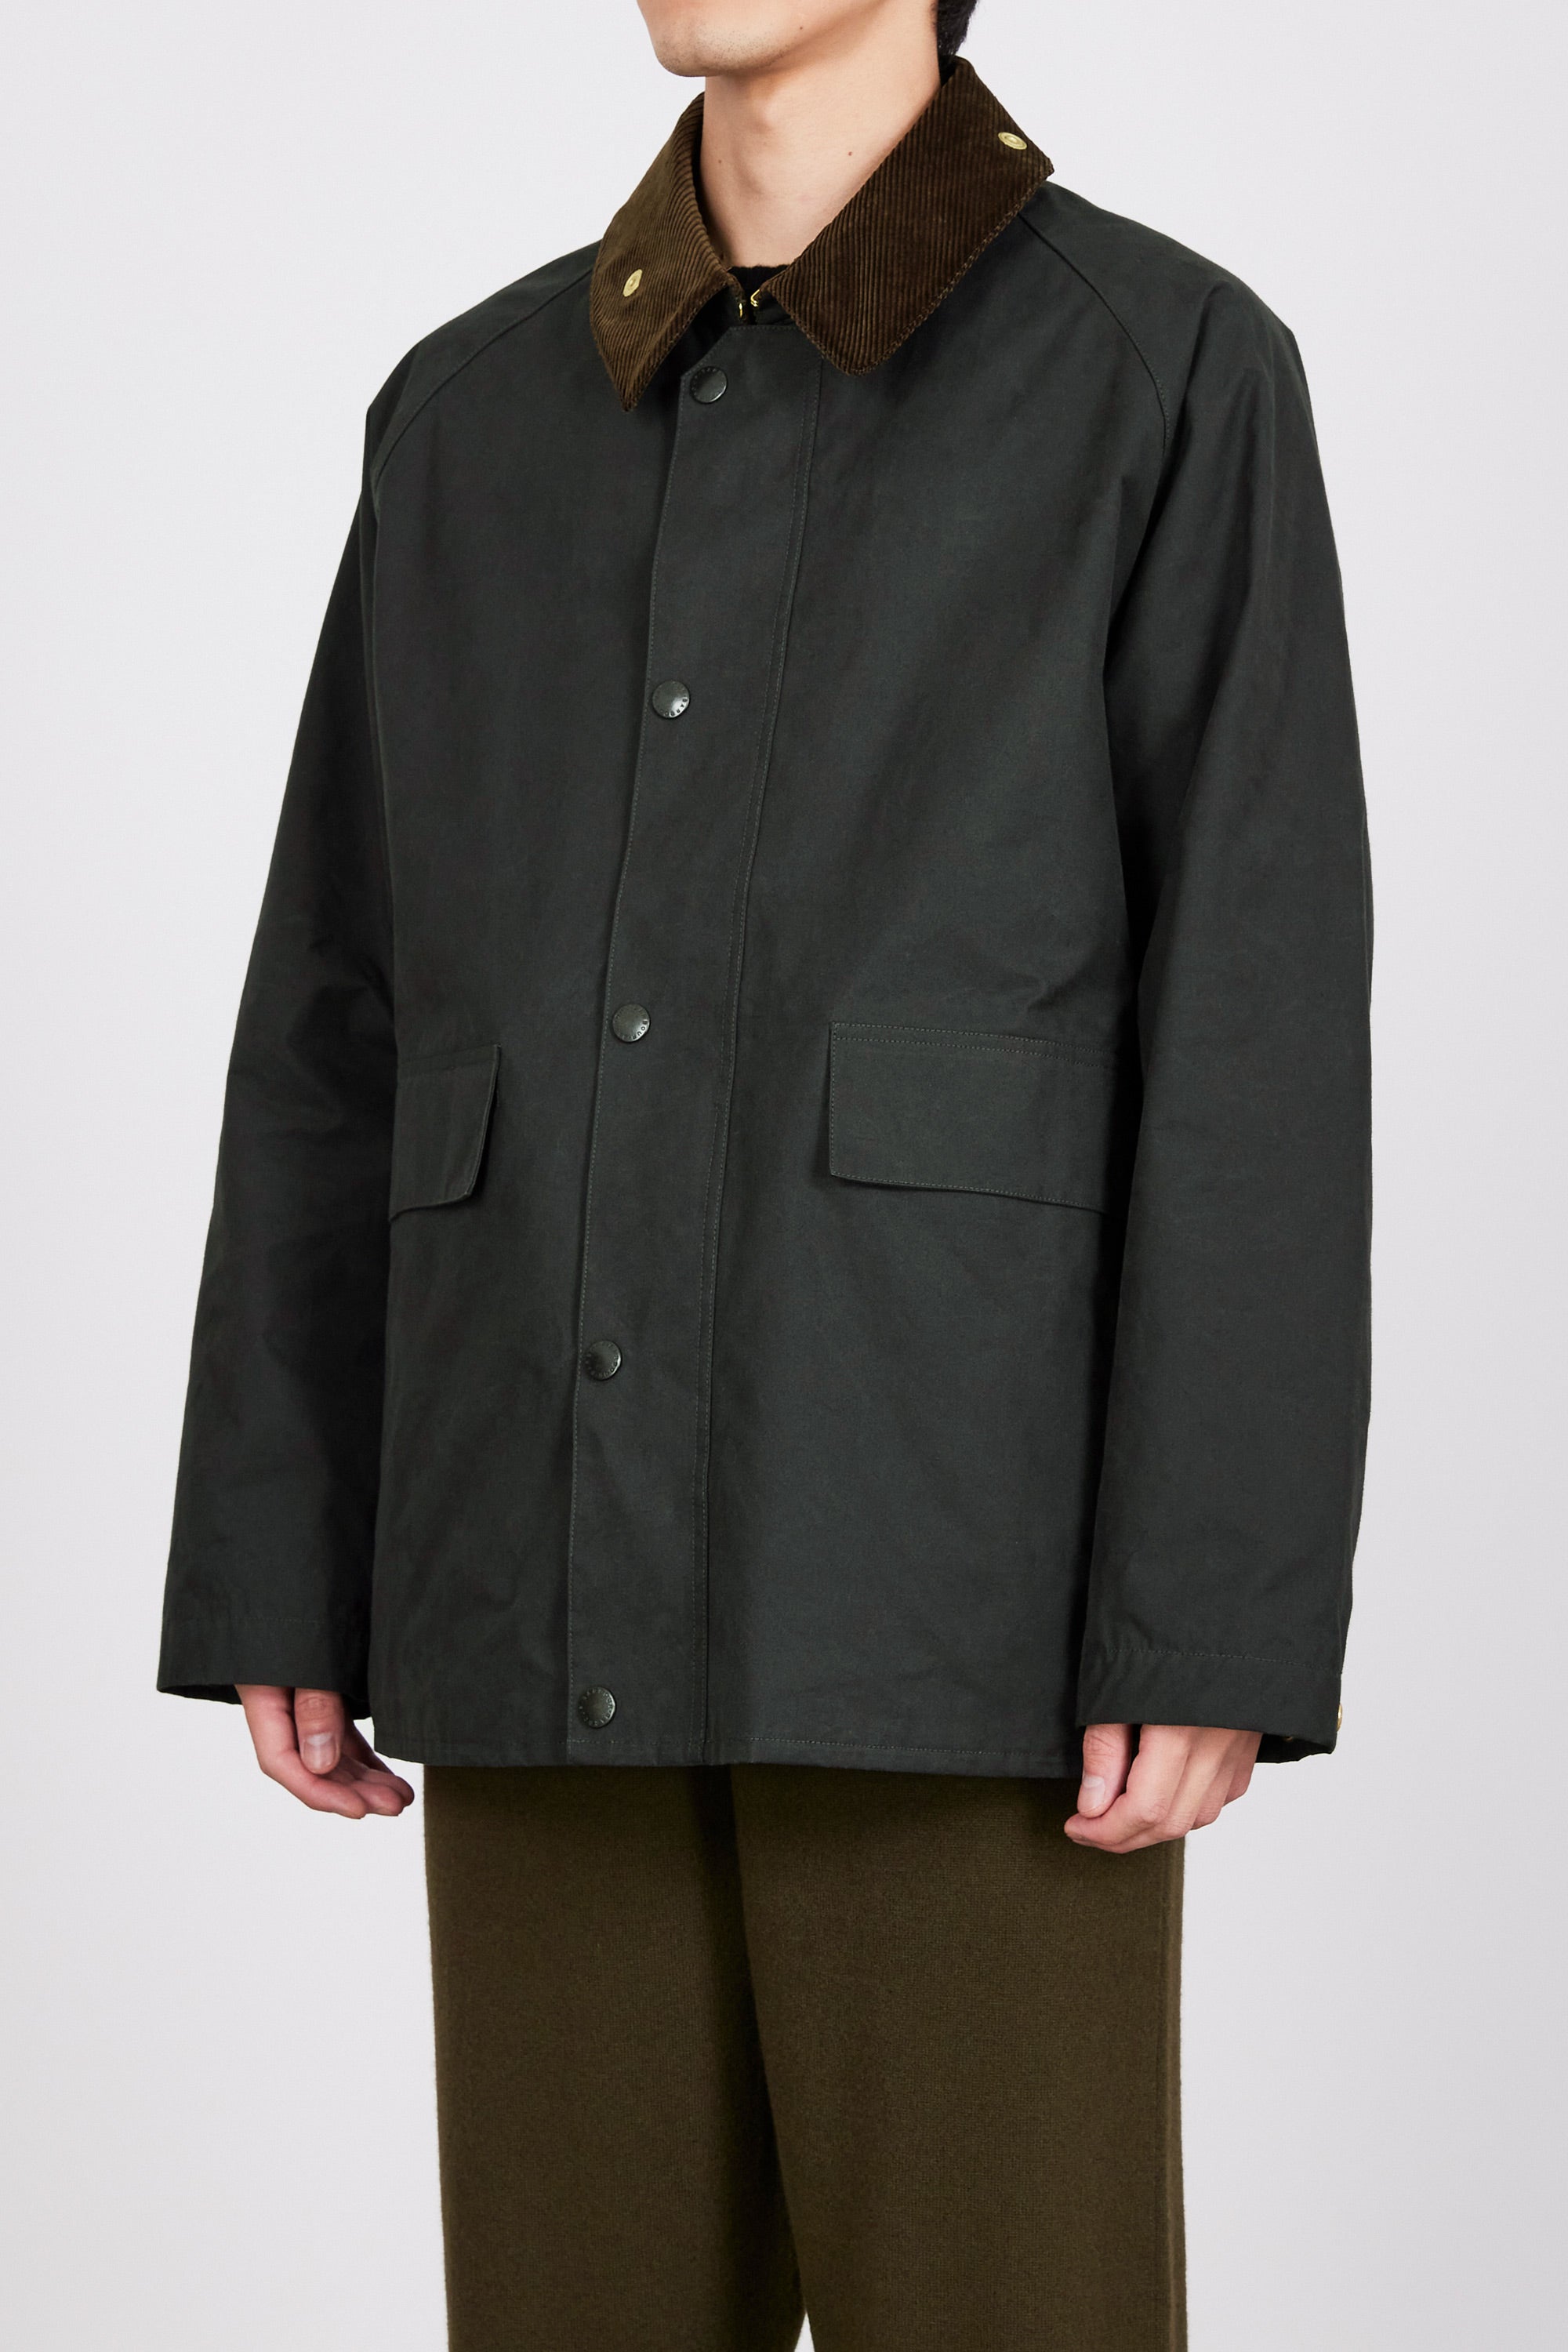 Barbour x MARKAWARE for EDIFICE TRANSPORT, Olive